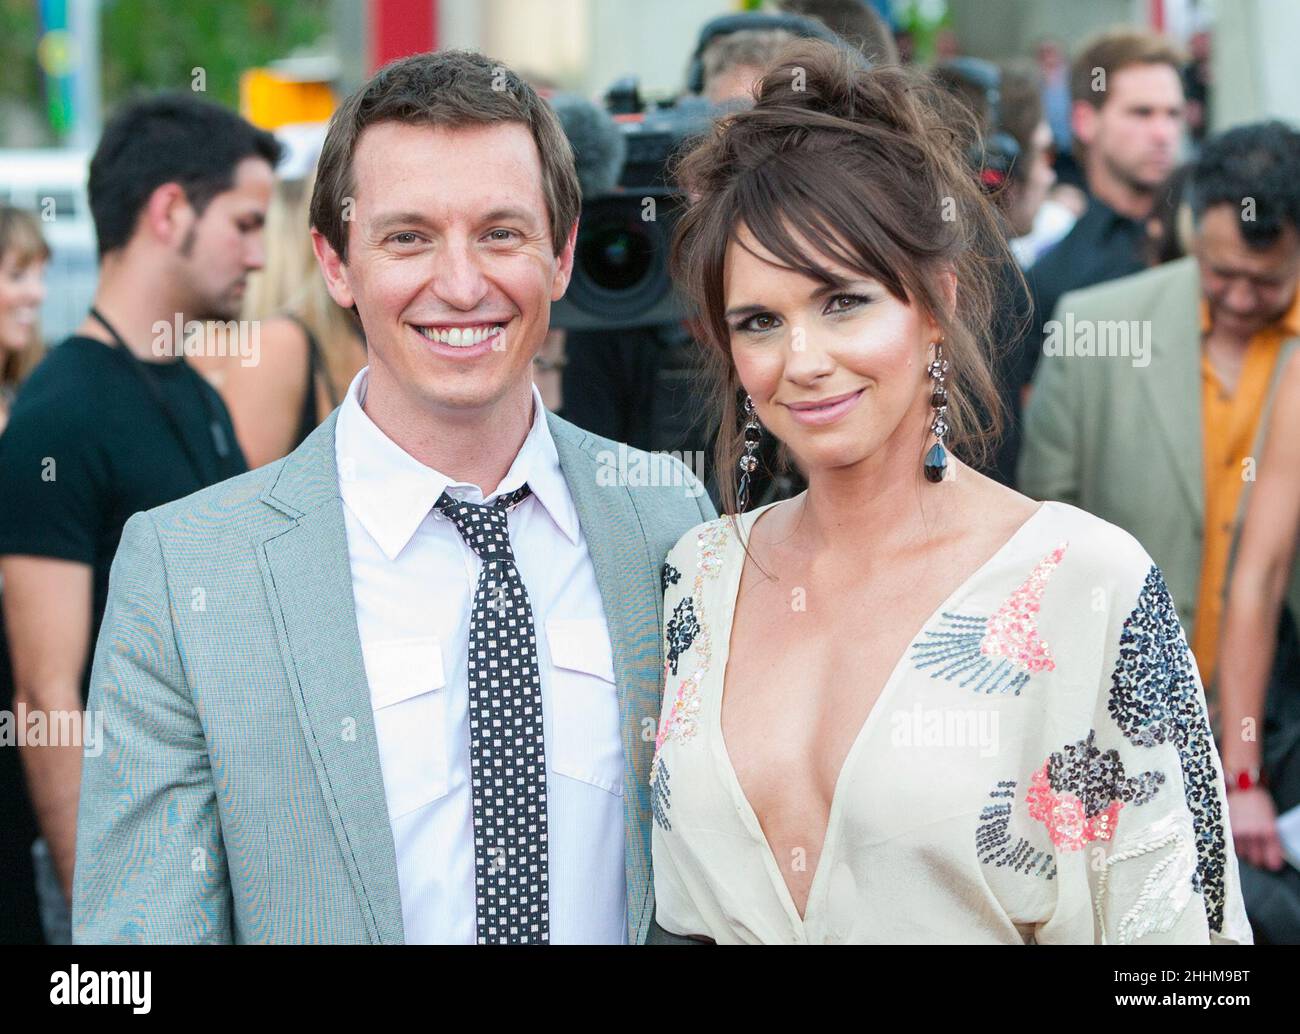 Red carpet arrivals at the 2008 ARIA (Australian Recording Industry Association) Awards held at Acer Arena in Sydney, Australia, on 19 October 2008. Pictured: Rove McManus and Tasma Walton Stock Photo